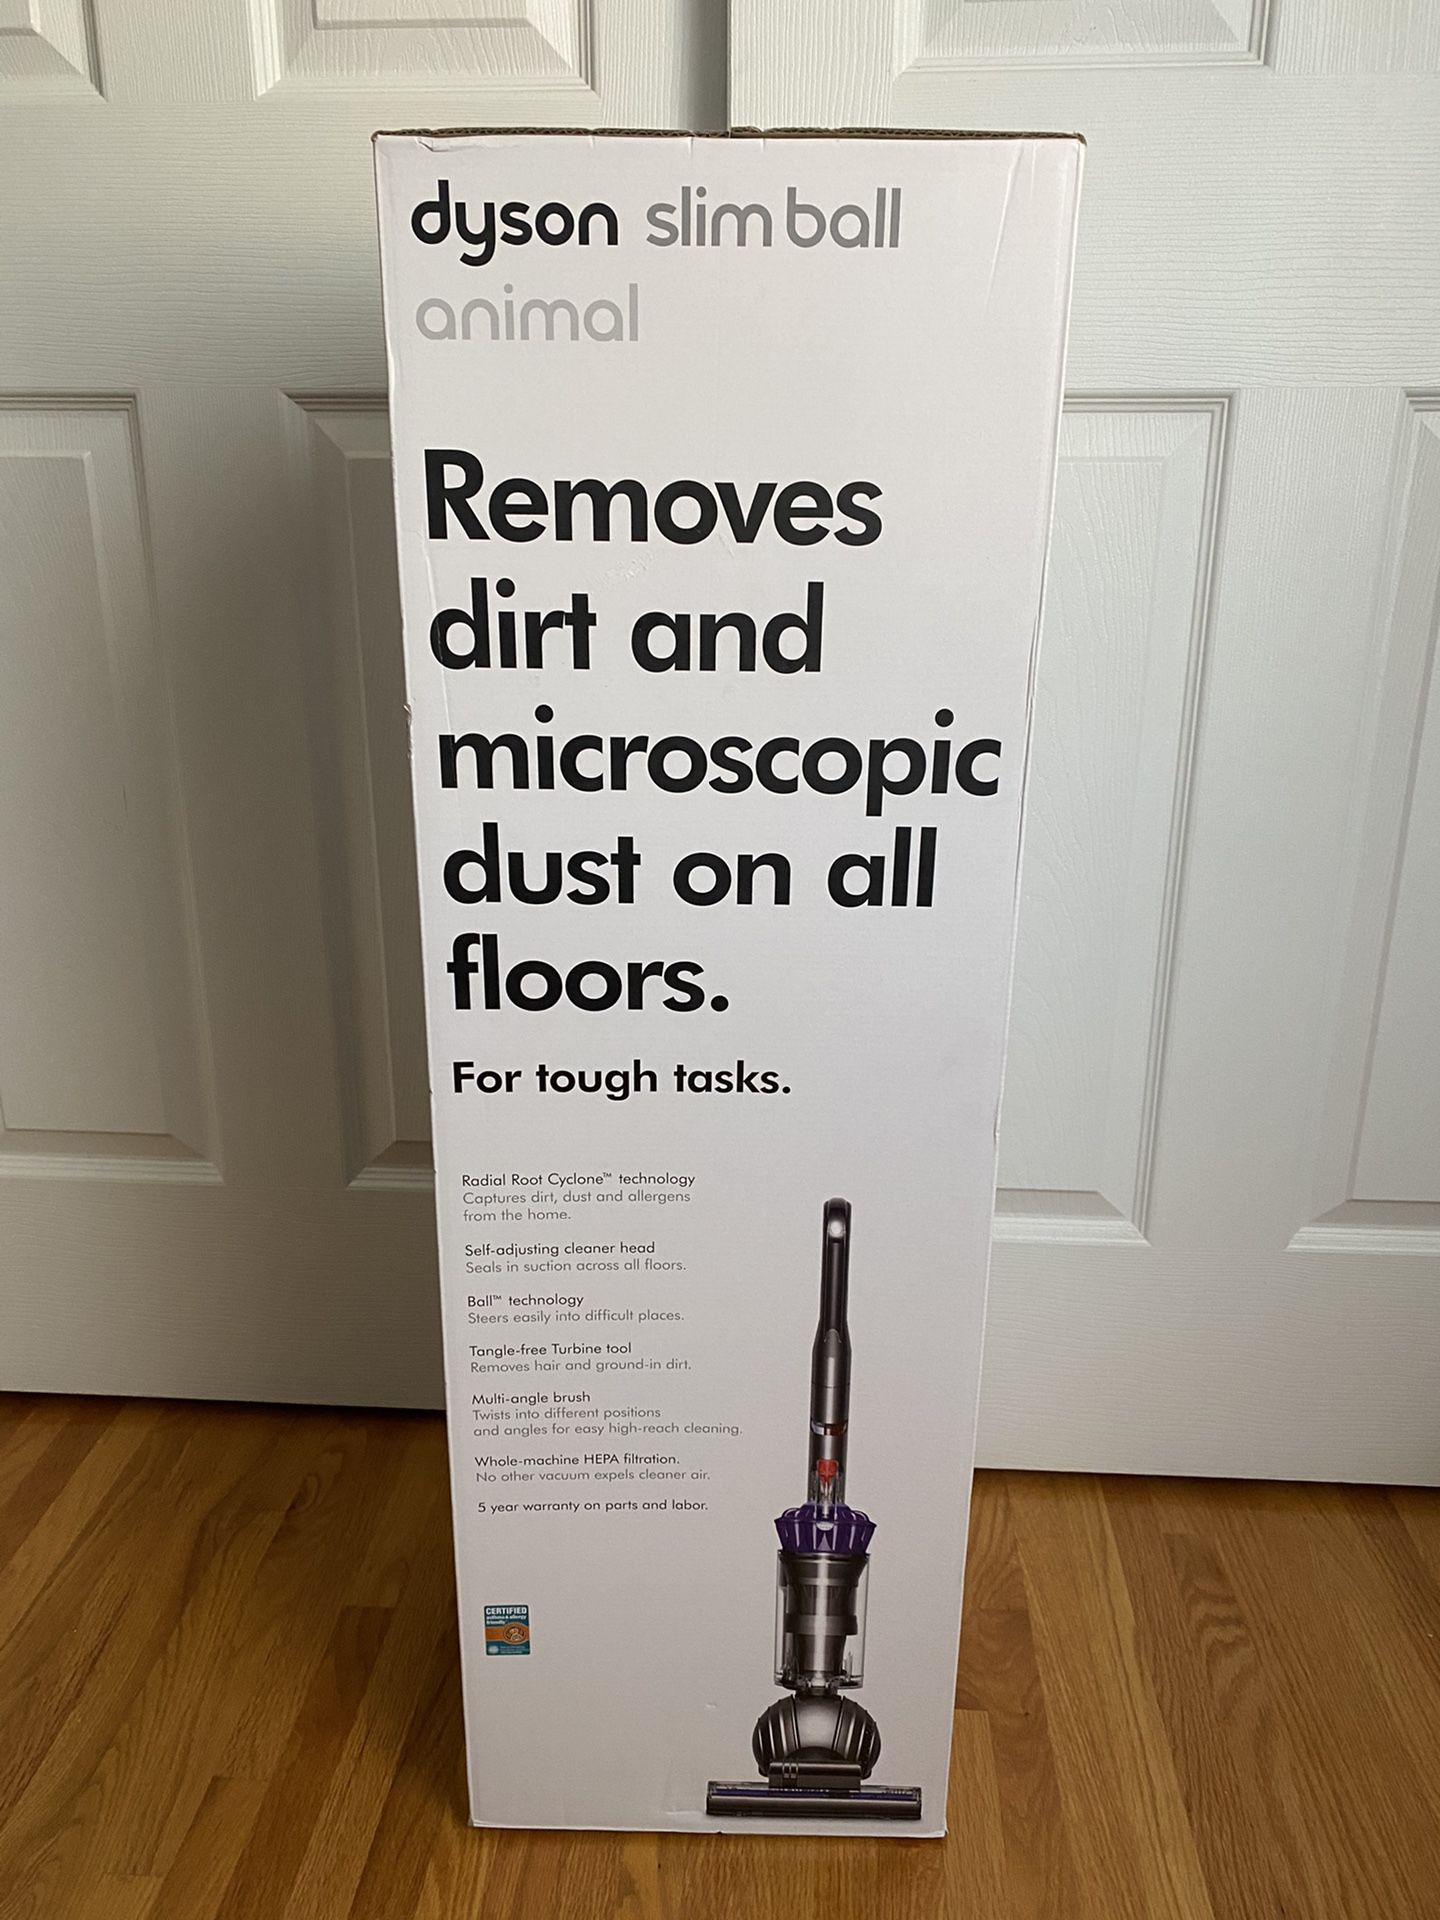 Dyson slim ball animal UP16 vacuum cleaner upright vacuum cleaner brand new sealed